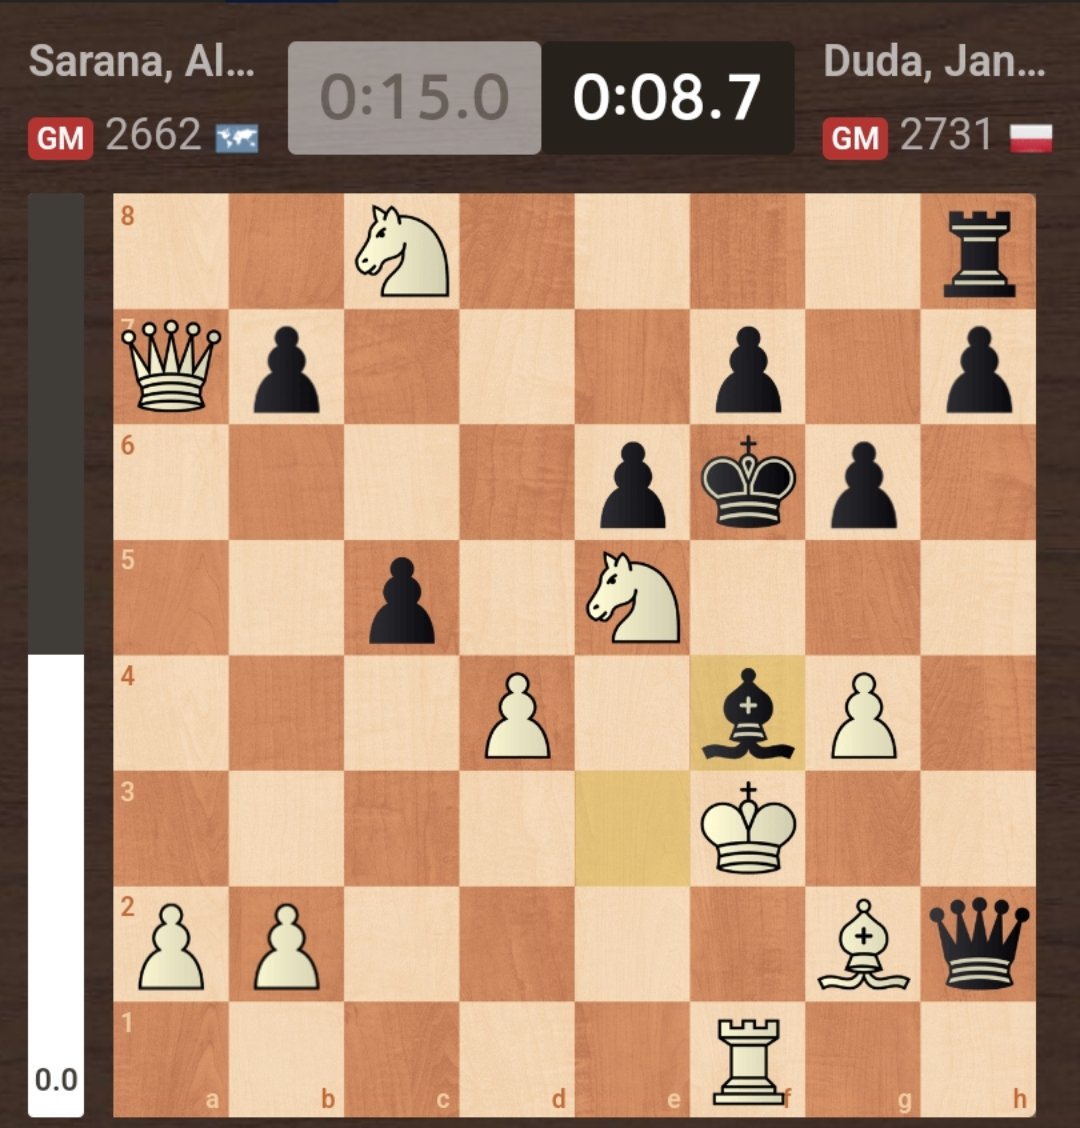 Looks totally fine #Chesscomglobal